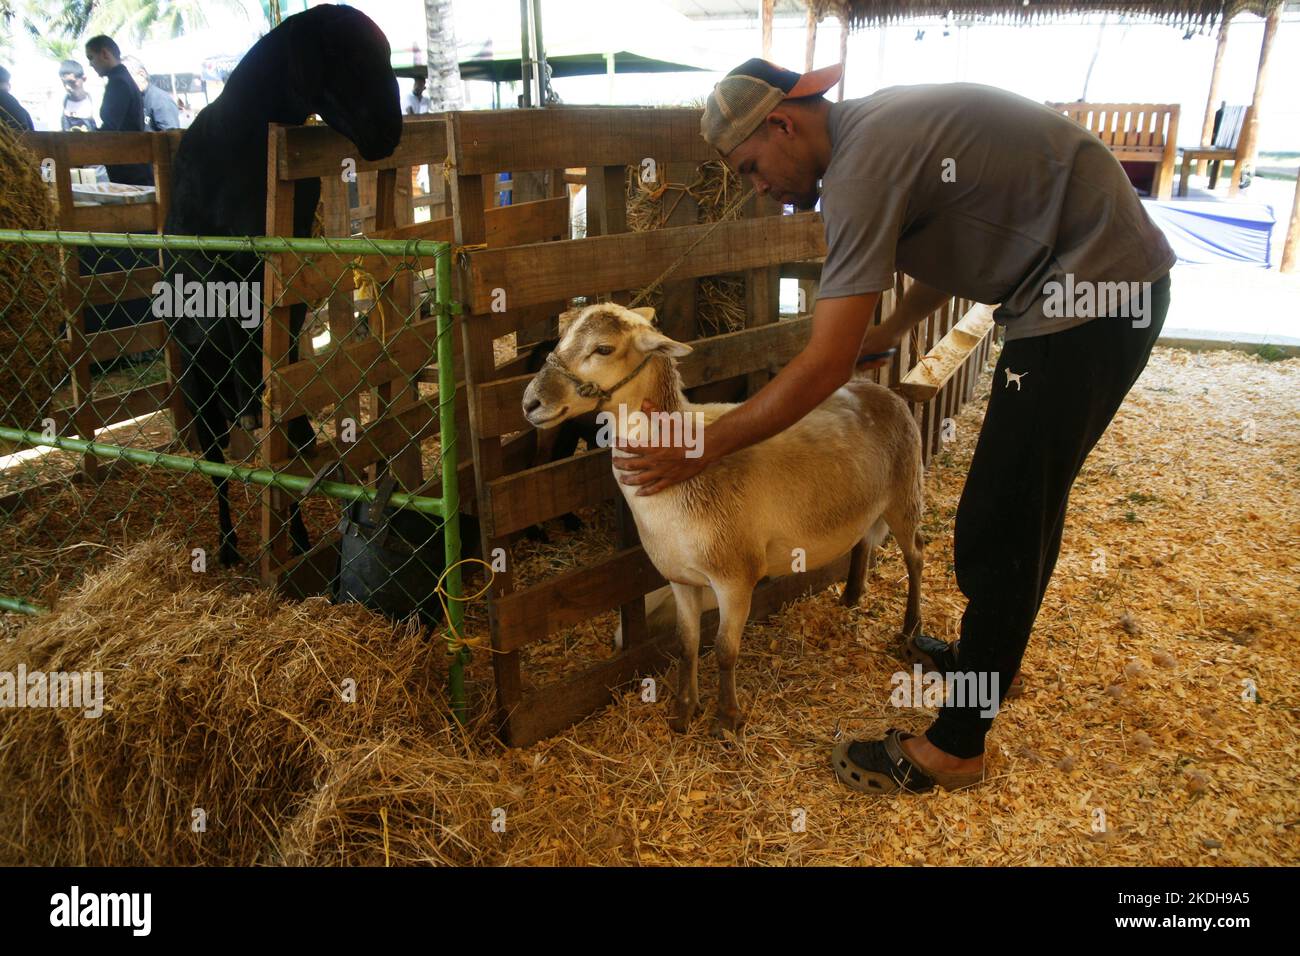 With the participation of more than 70 companies from the livestock, sheep, goat, agricultural, commercial, hardware and automotive sectors, they met at the facilities of the Hotel Tibisay del Lago, this Sunday, November 6, 2022 in the city of Maracaibo, Venezuela. The National Federation of Livestock Farmers (Fedenaga) and the Federation of Livestock Farmers of the Maracaibo Lake Basin (Fegalago) organized this Expo Livestock Congress. The productive potentialities to be developed in the private livestock sector hope to get ahead of the crisis and overcome the current obstacles and challenges Stock Photo